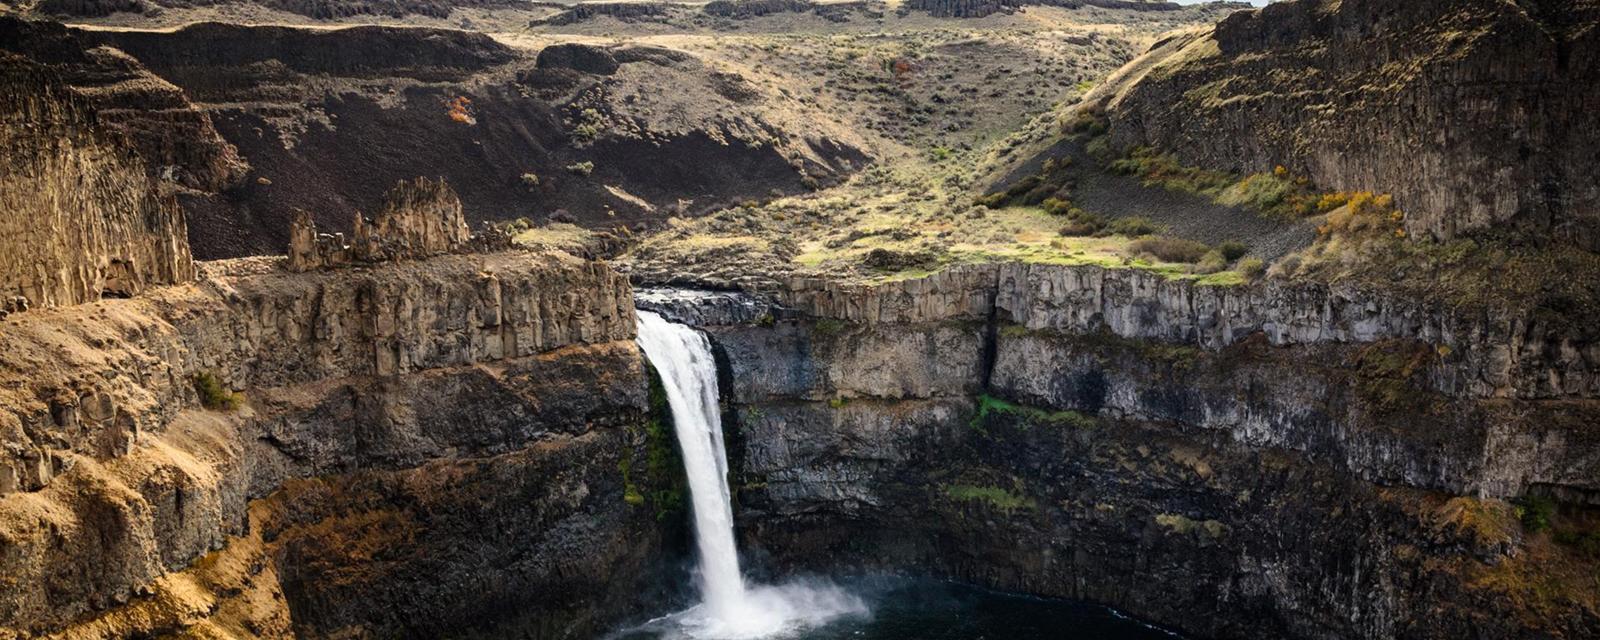 Breaking records

Dry Falls (pictured), the site of a former waterfall, is a horseshoe-shaped cliff that’s twice as high and three times as wide as Niagara Falls, making it the largest confirmed waterfall in the planet’s history. Today, the site is preserved as Sun Lakes-Dry Falls State Park, where visitors can see the impact of these relatively recent geologic events through overlooks, canyon trails and interpretative displays. (Credit: Zack Frank)